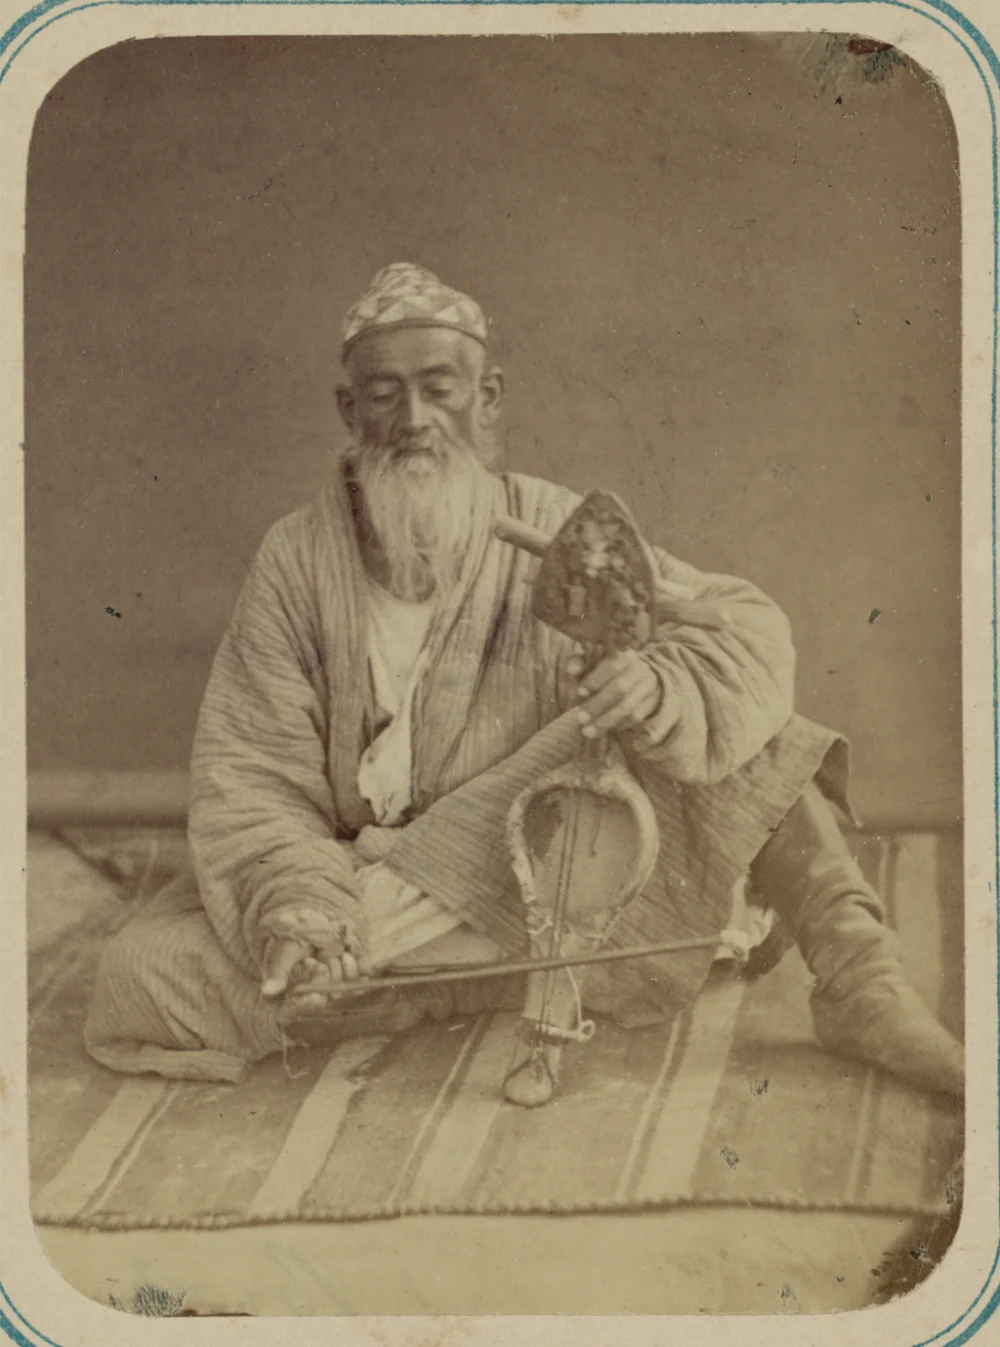 Pastimes of Central Asians. A Musician Playing a Kobyz/Kauz. This photograph is from the ethnographical part of the Turkestan Album. Between 1865 and 1872/Wikimedia commons